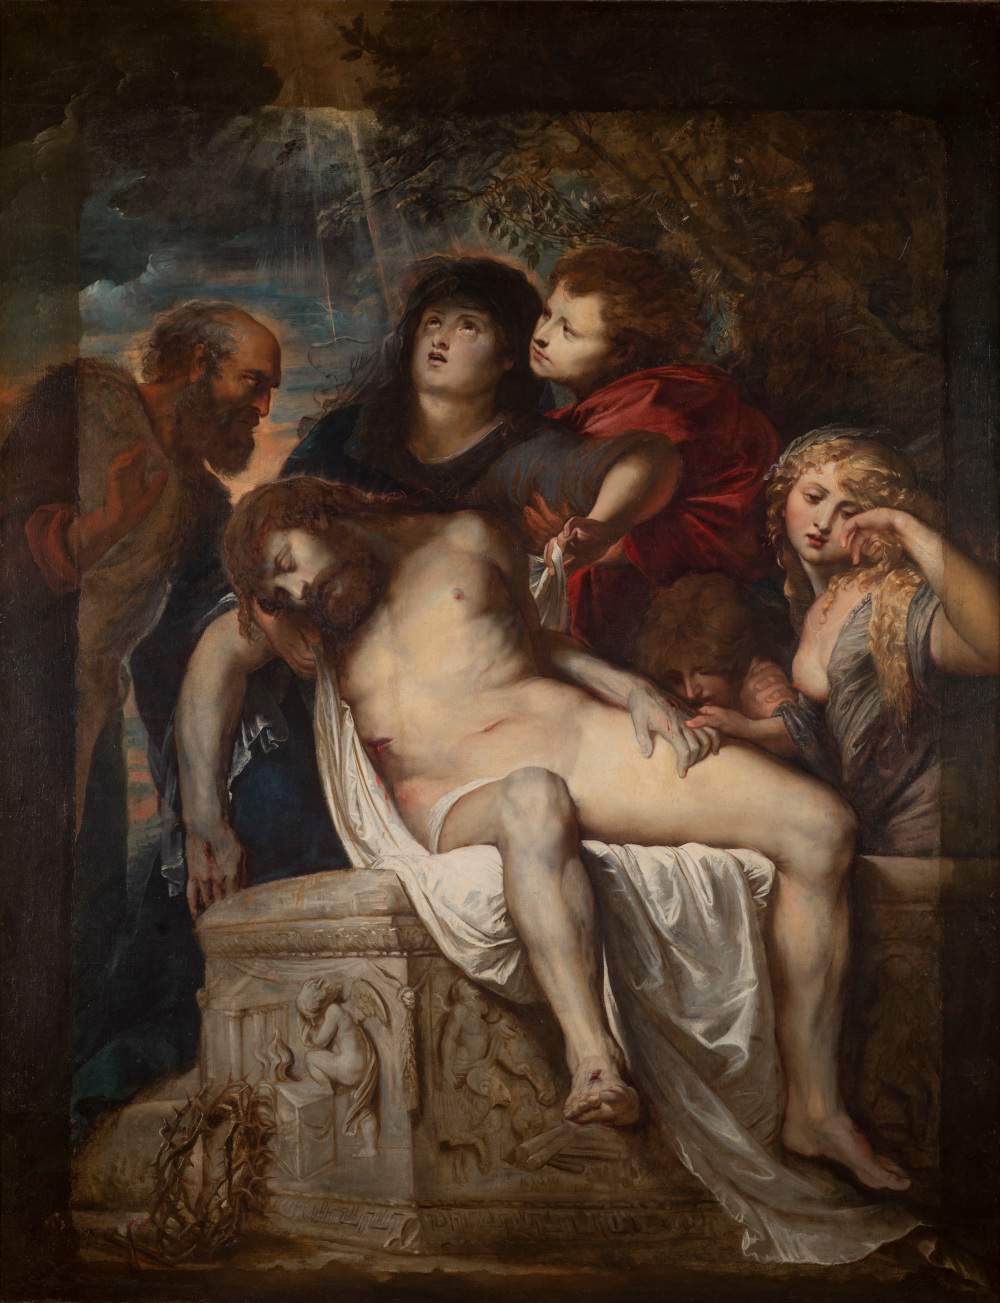 Penone, Dosso Dossi and Rubens: the Borghese Gallery announces its 2023 exhibitions 